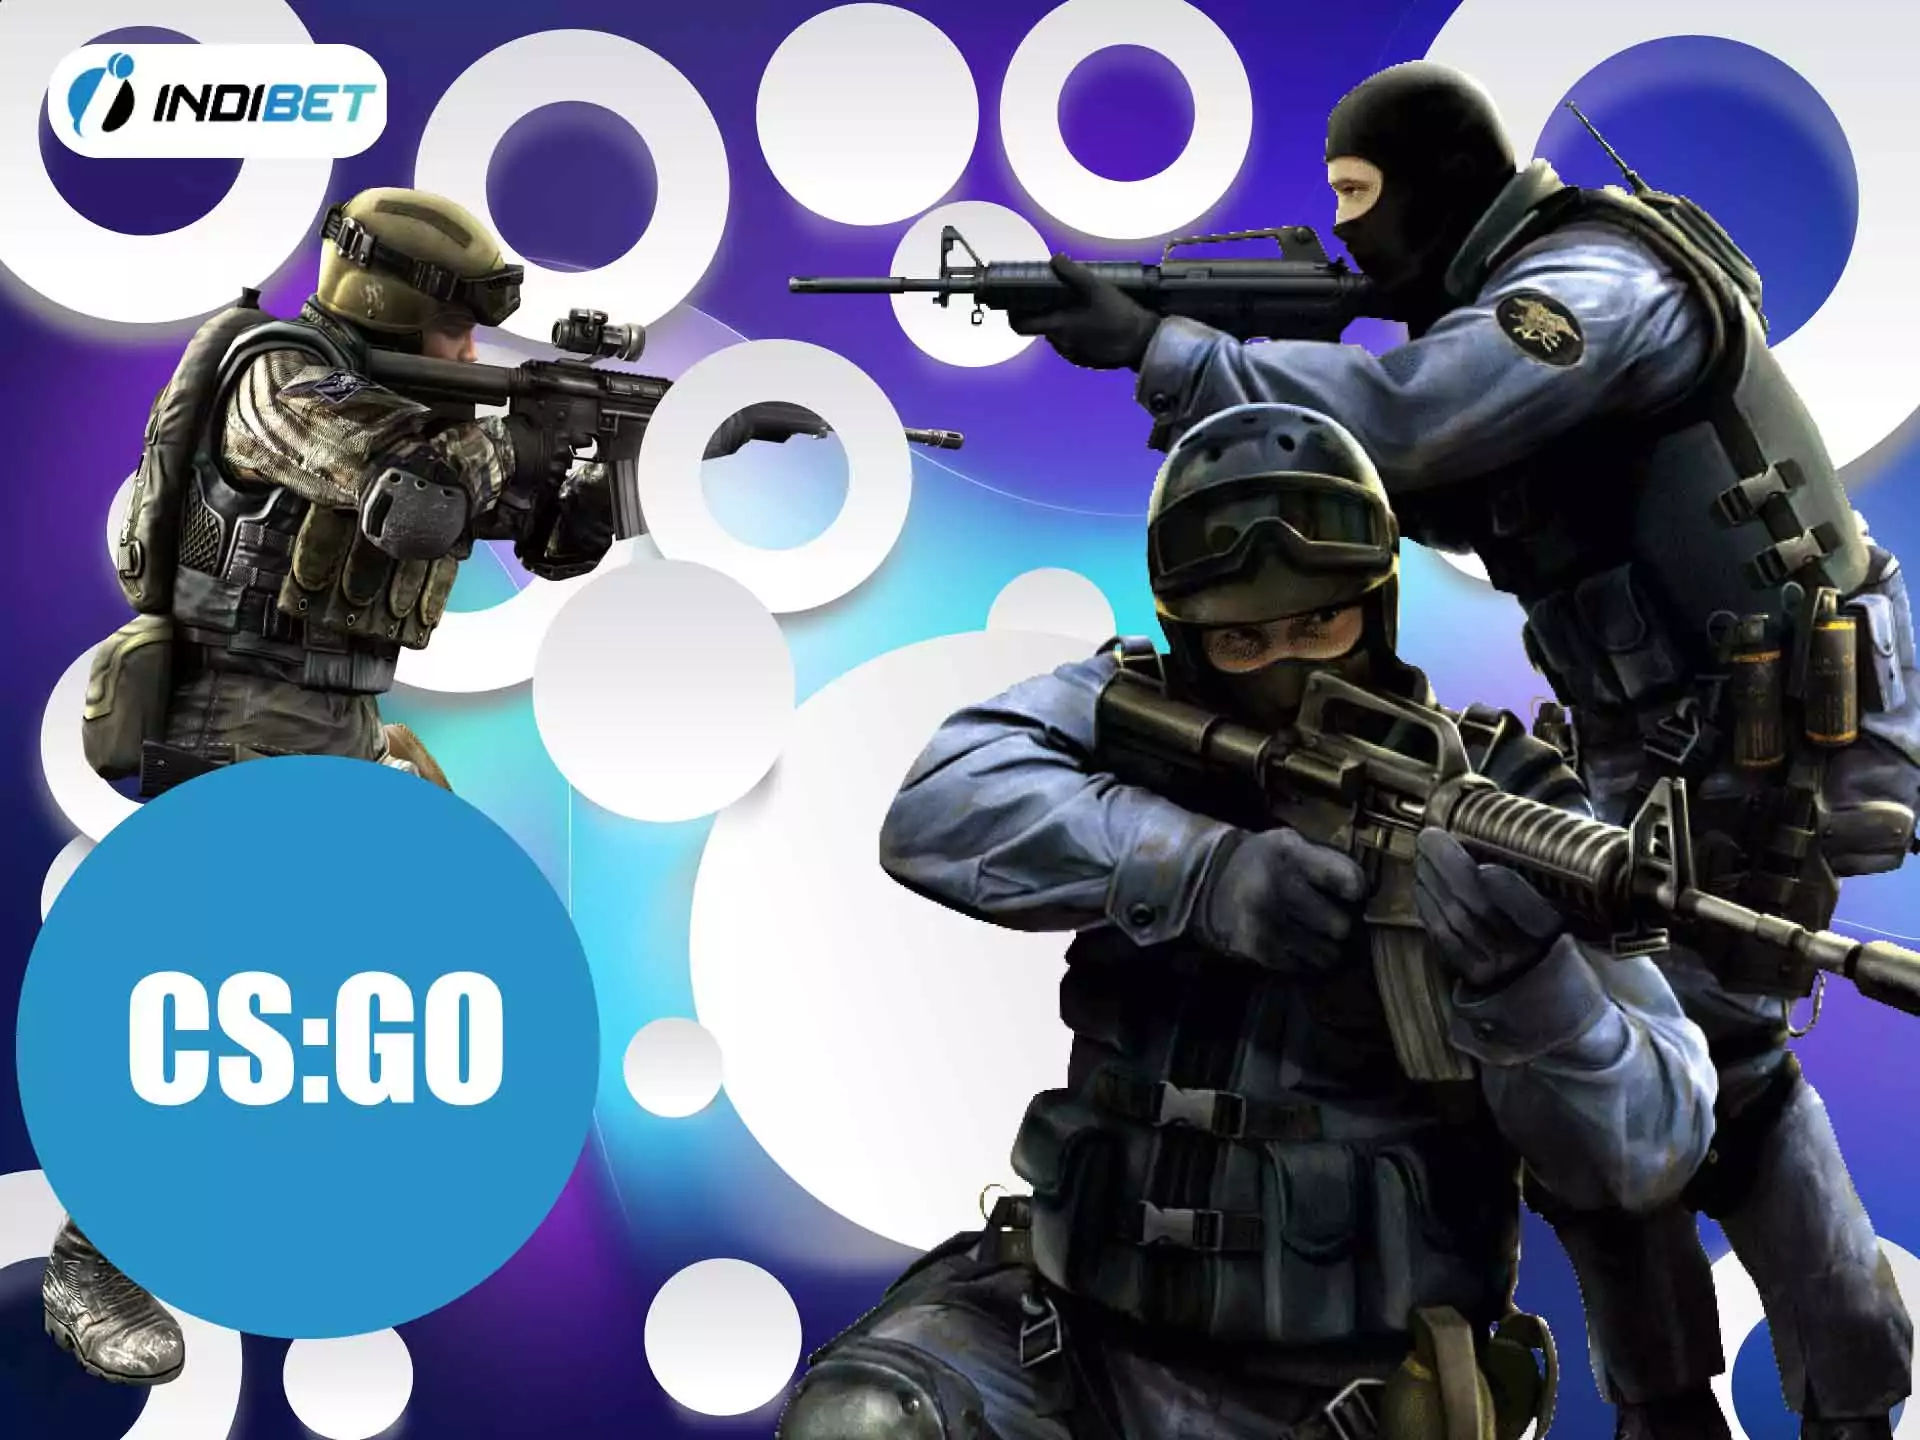 Place bets on CS:GO and watch the matches online at Indibet.